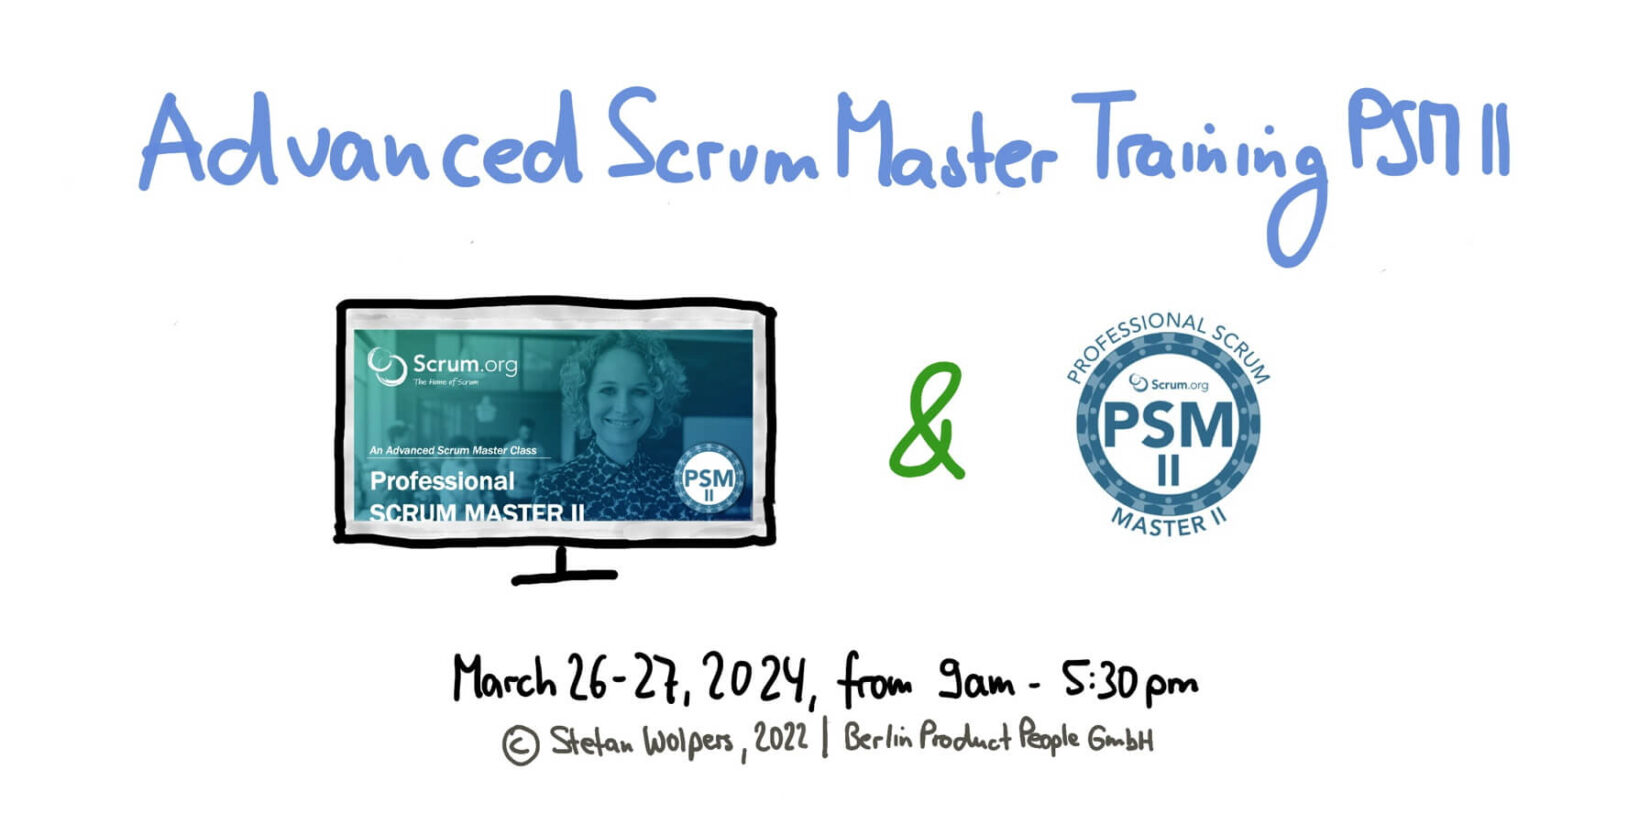 Advanced Professional Scrum Master Training w/ PSM II Certificate — March 26-27, 2024 — Berlin-Product-People.com